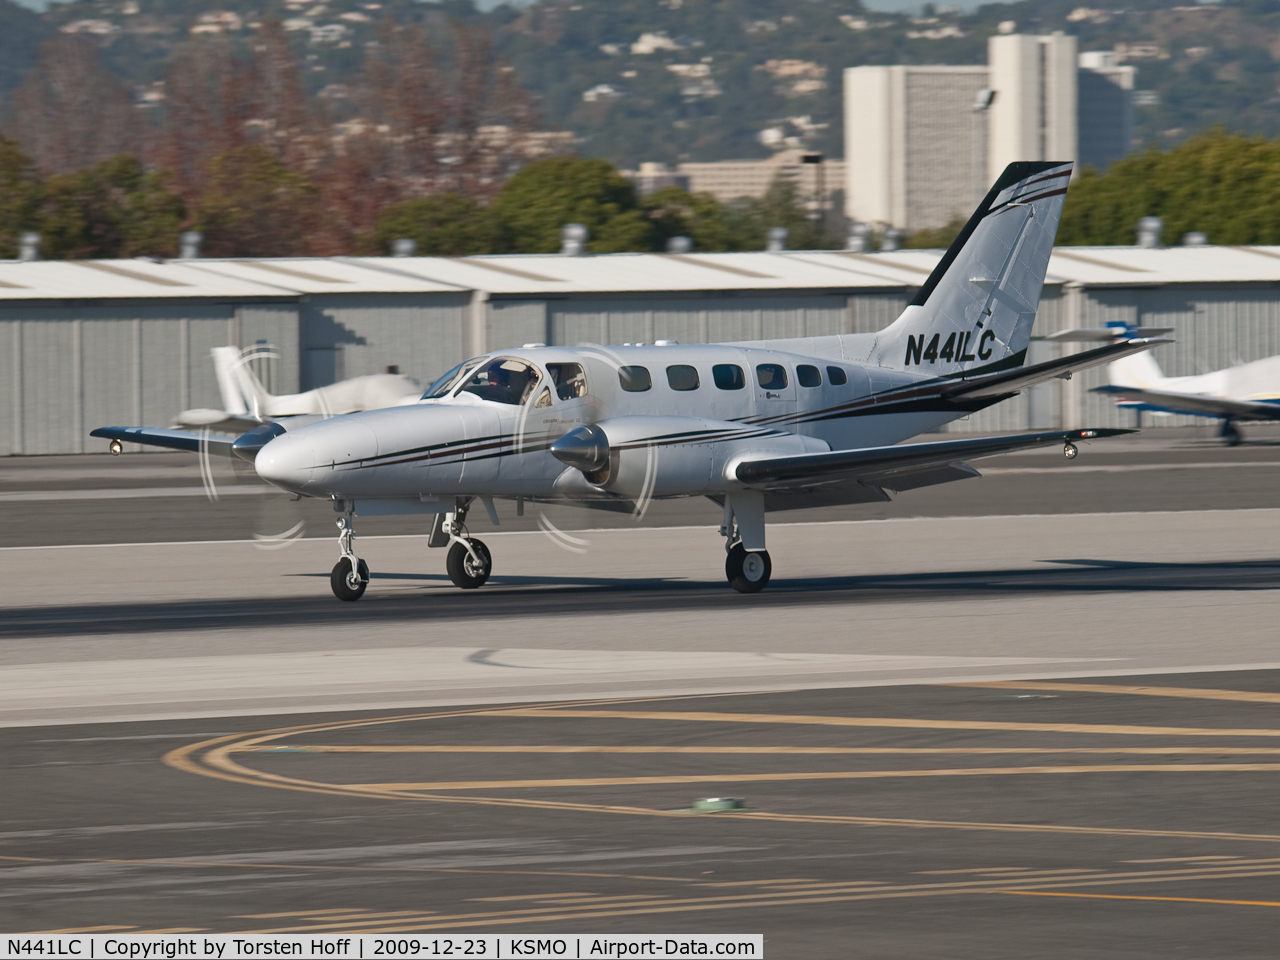 N441LC, 1978 Cessna 441 Conquest II C/N 441-0035, N441LC departing from RWY 21